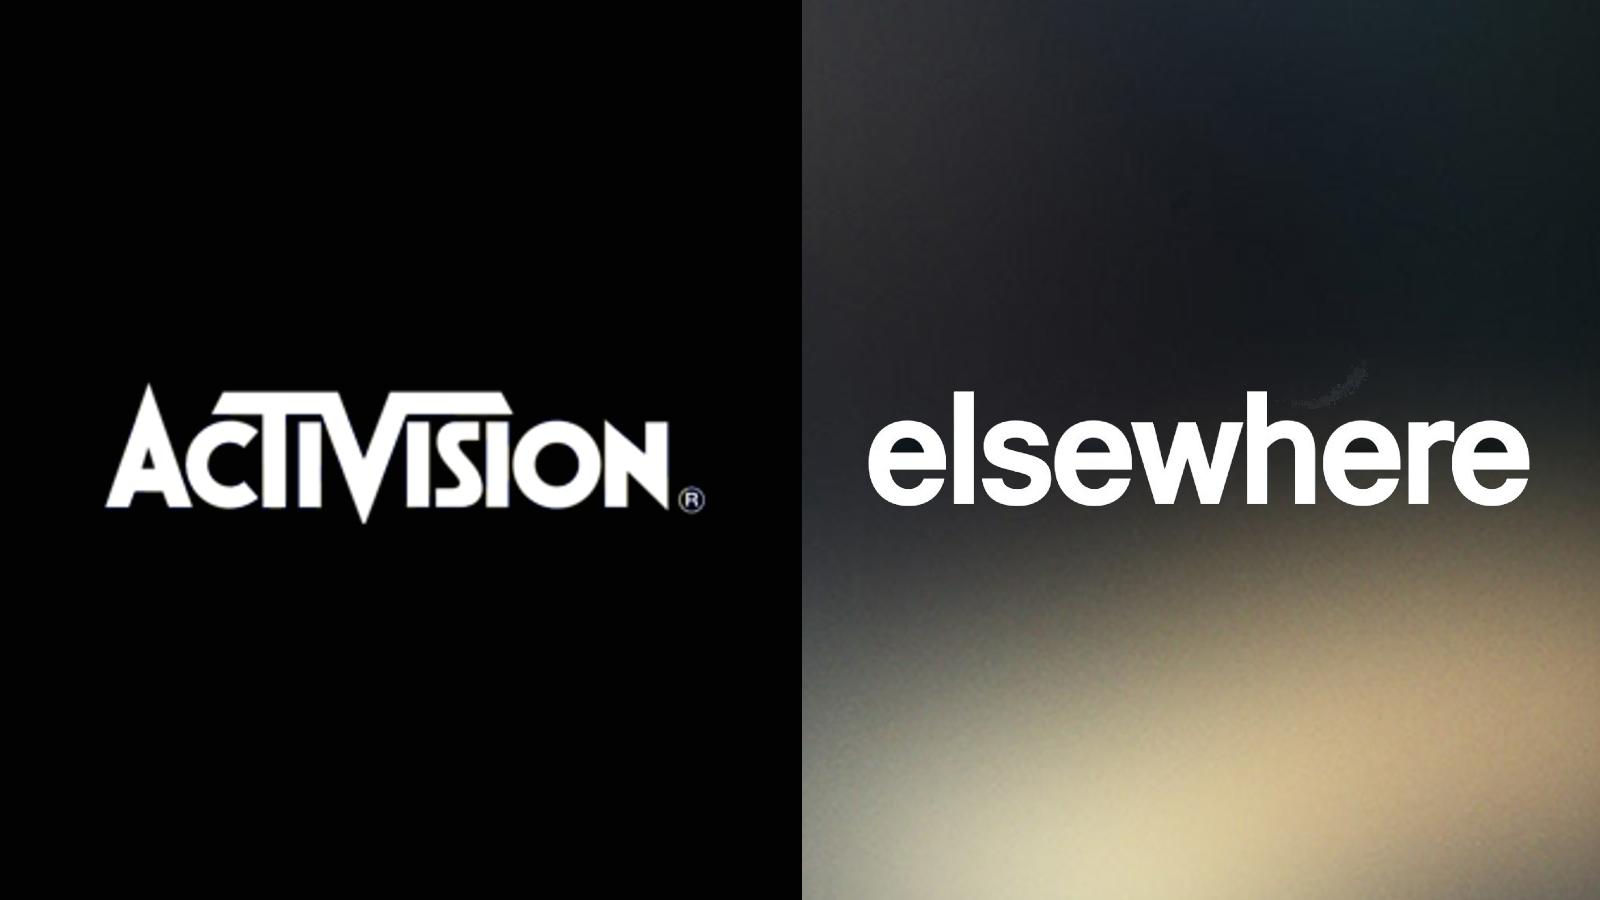 Activision and elsewhere entertainment logos